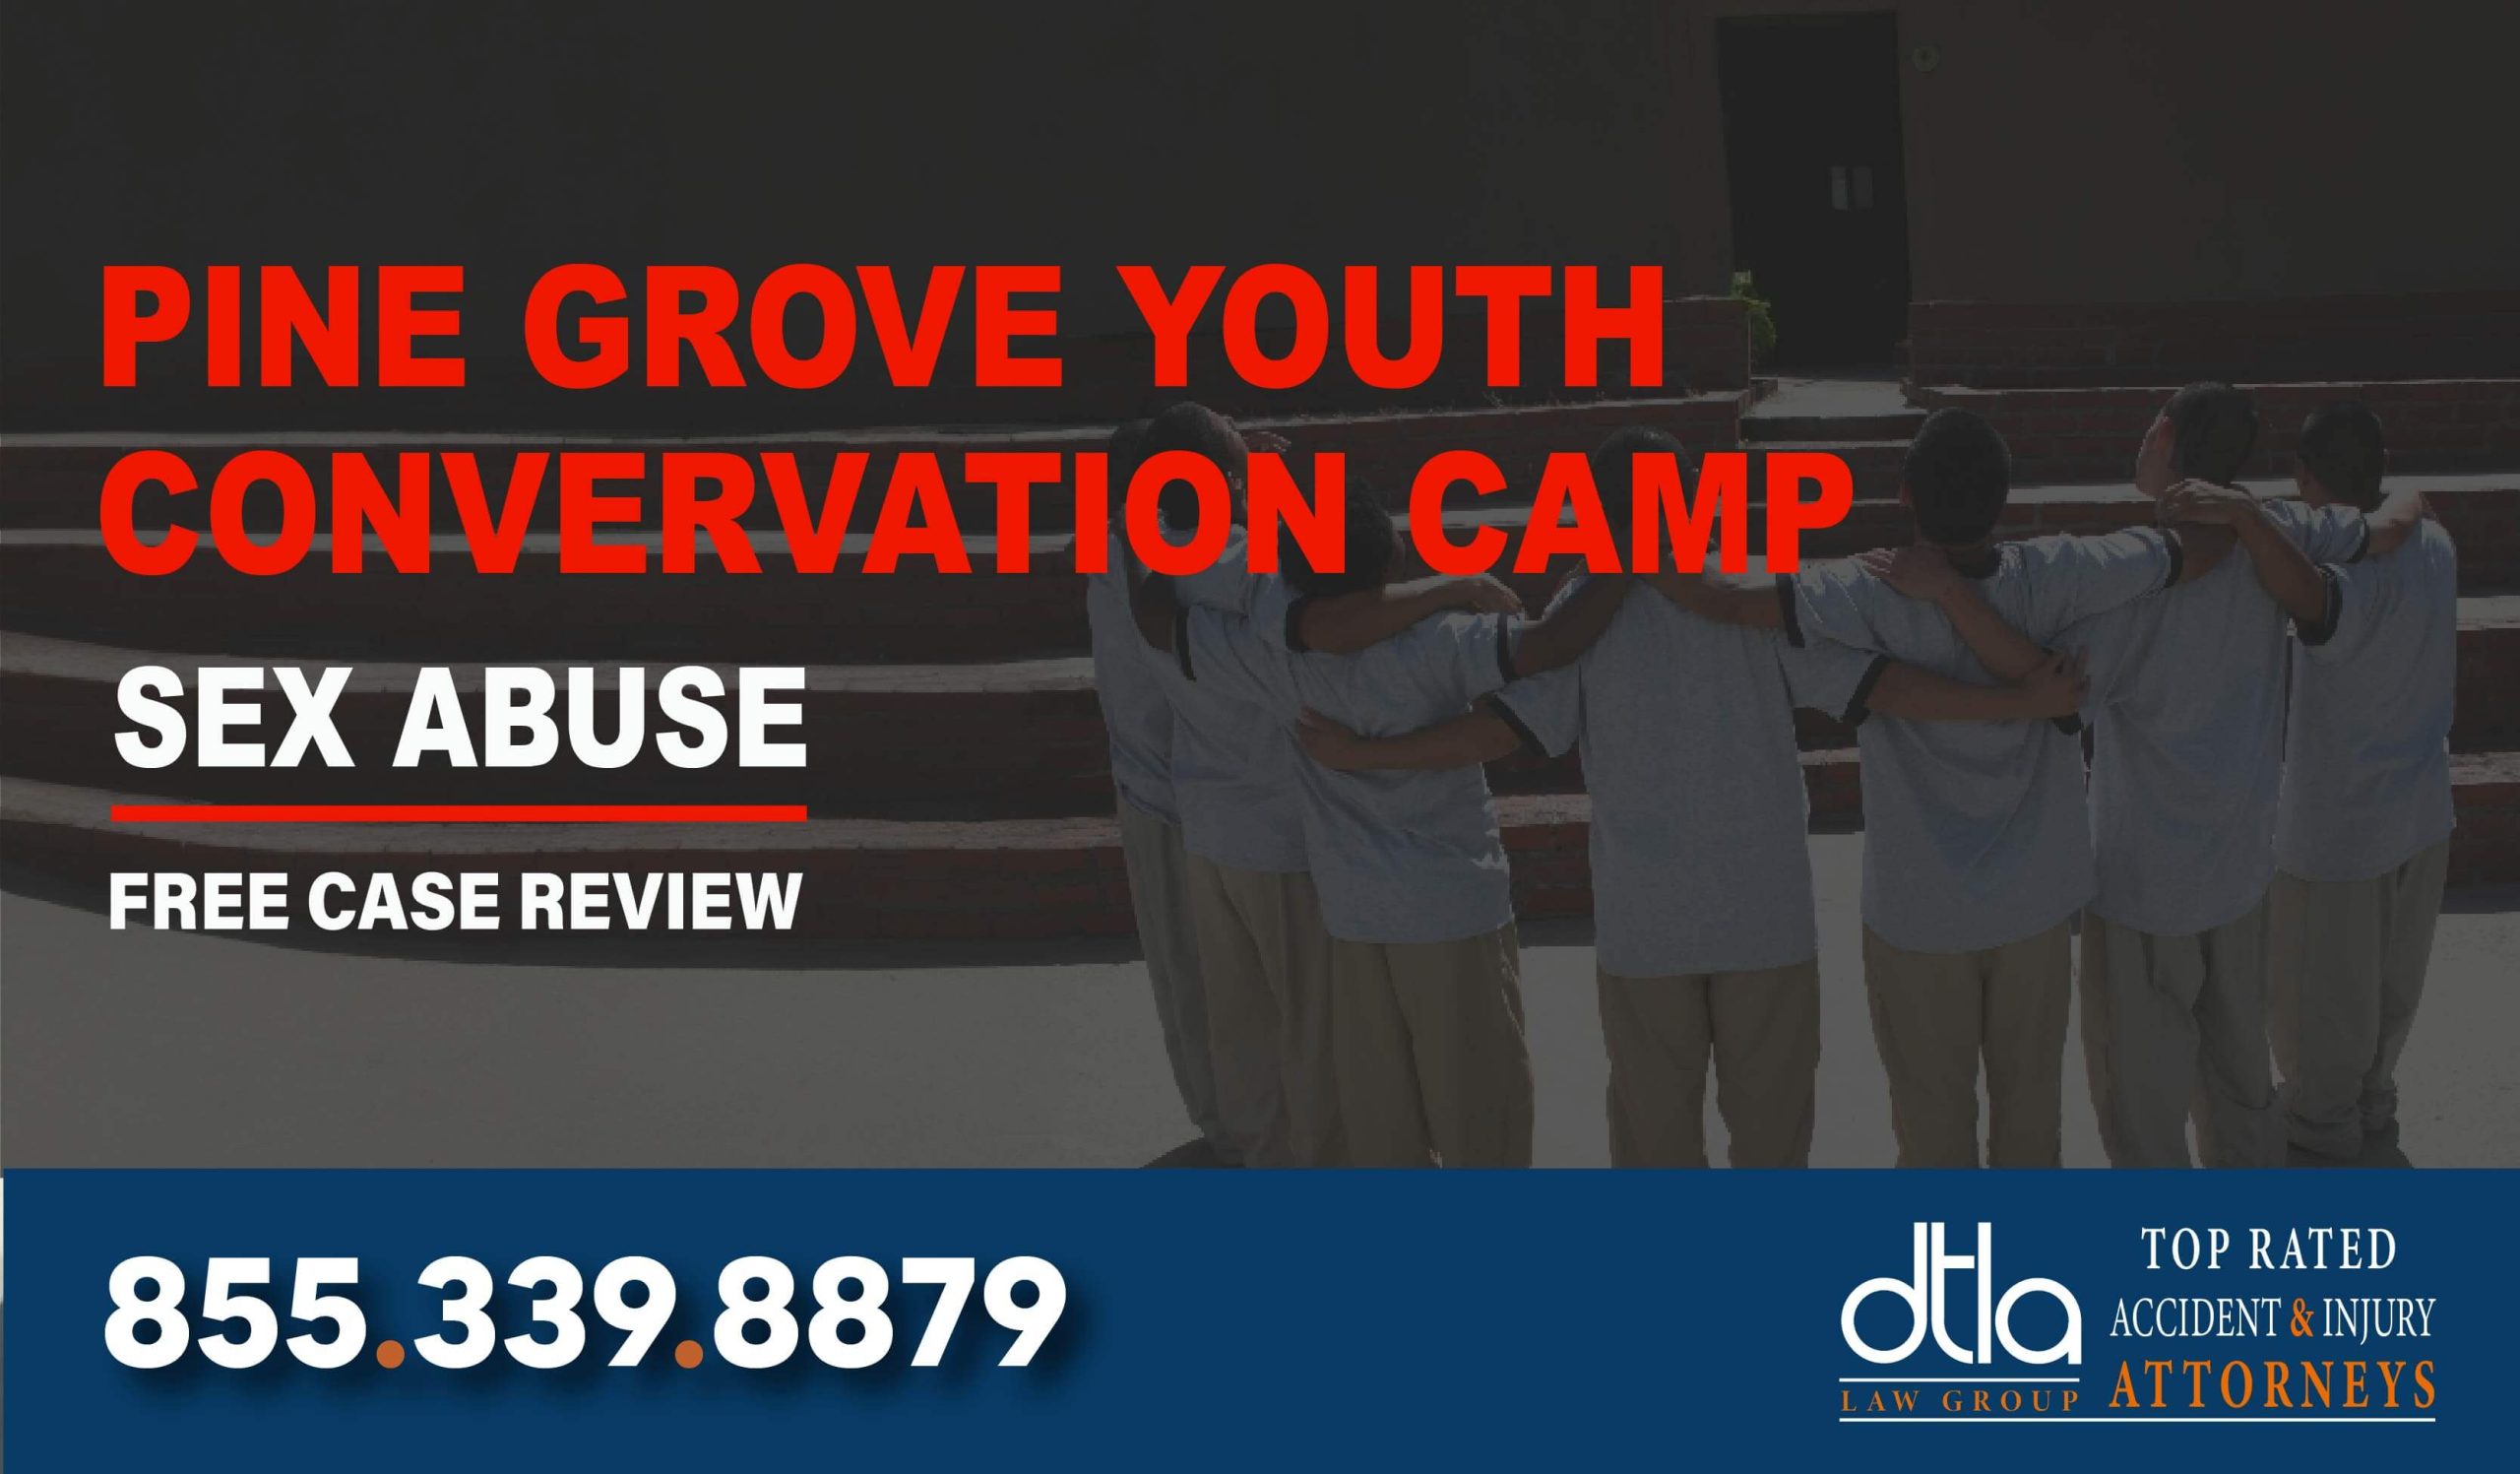 Pine Grove Youth Conservation Camp Lawsuit Lawyer sue liability attorney compensation incident